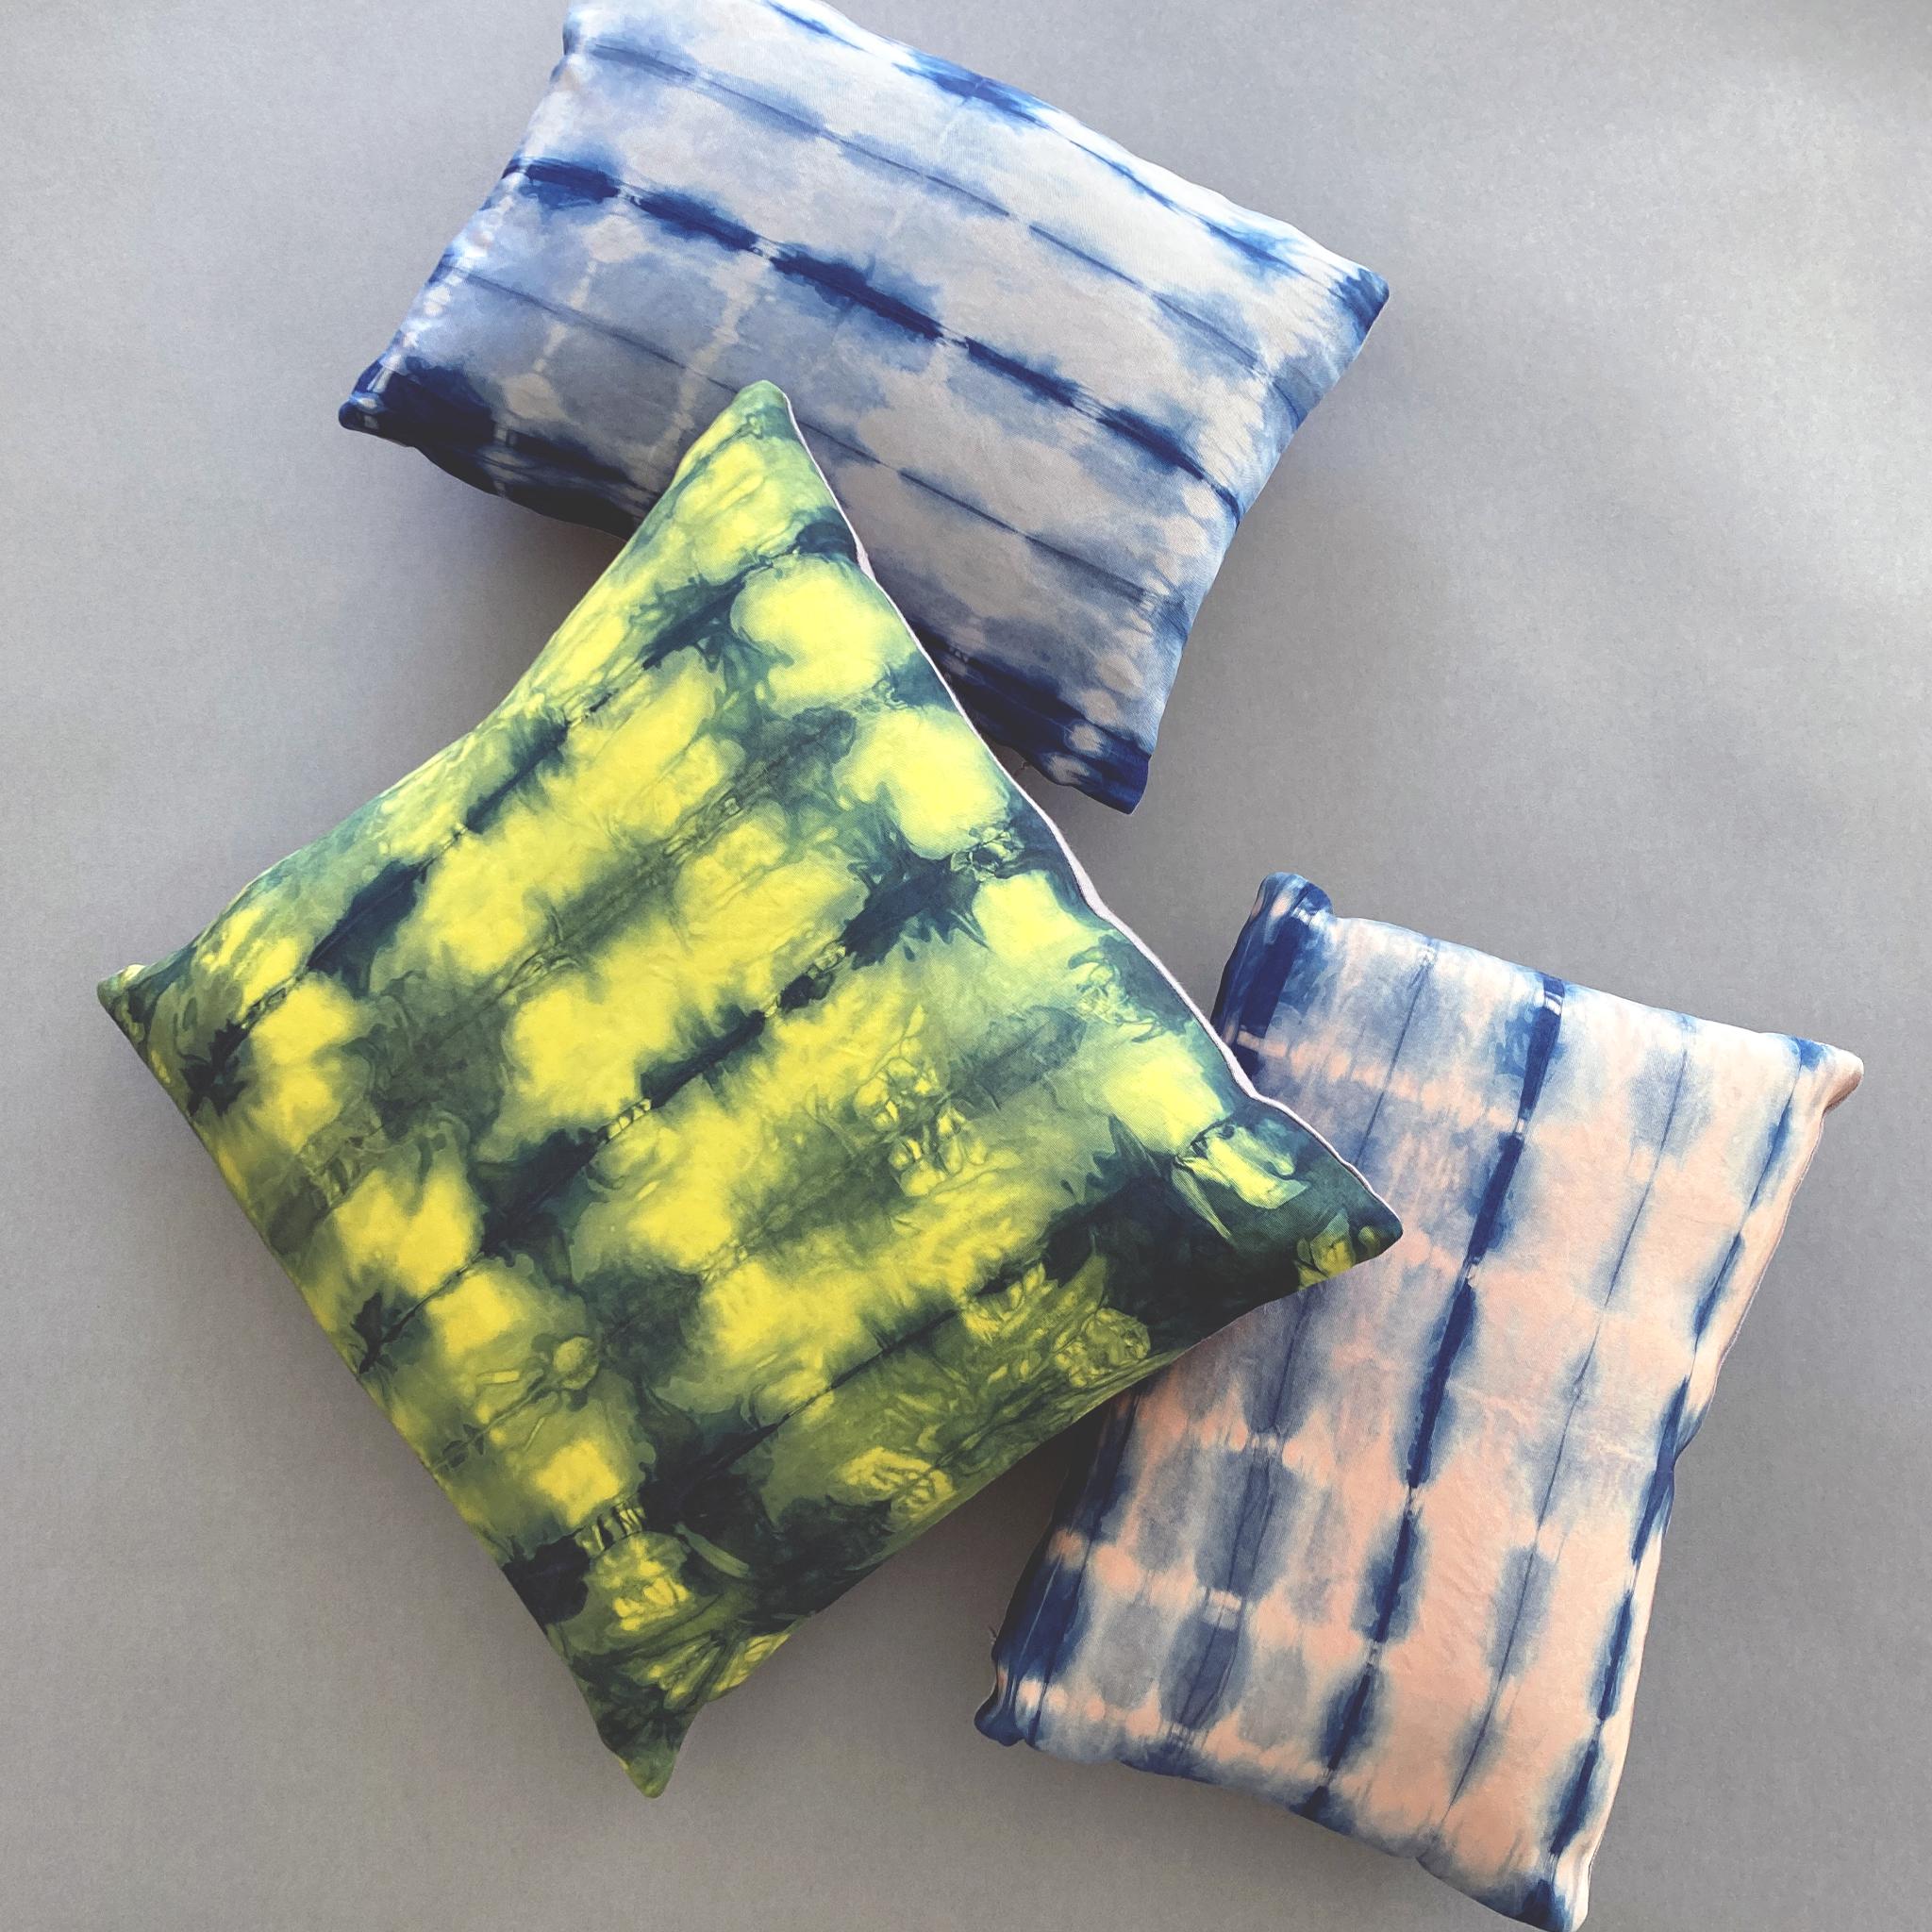 Canary yellow silk faille pillow dyed with indigo in Wave pattern with gray linen backing. Hand-dyed and sewn in New York City, down pillow insert made locally in NYC. Pillow measures 18 x 18 inches. Each silk pillow is hand made and one of a